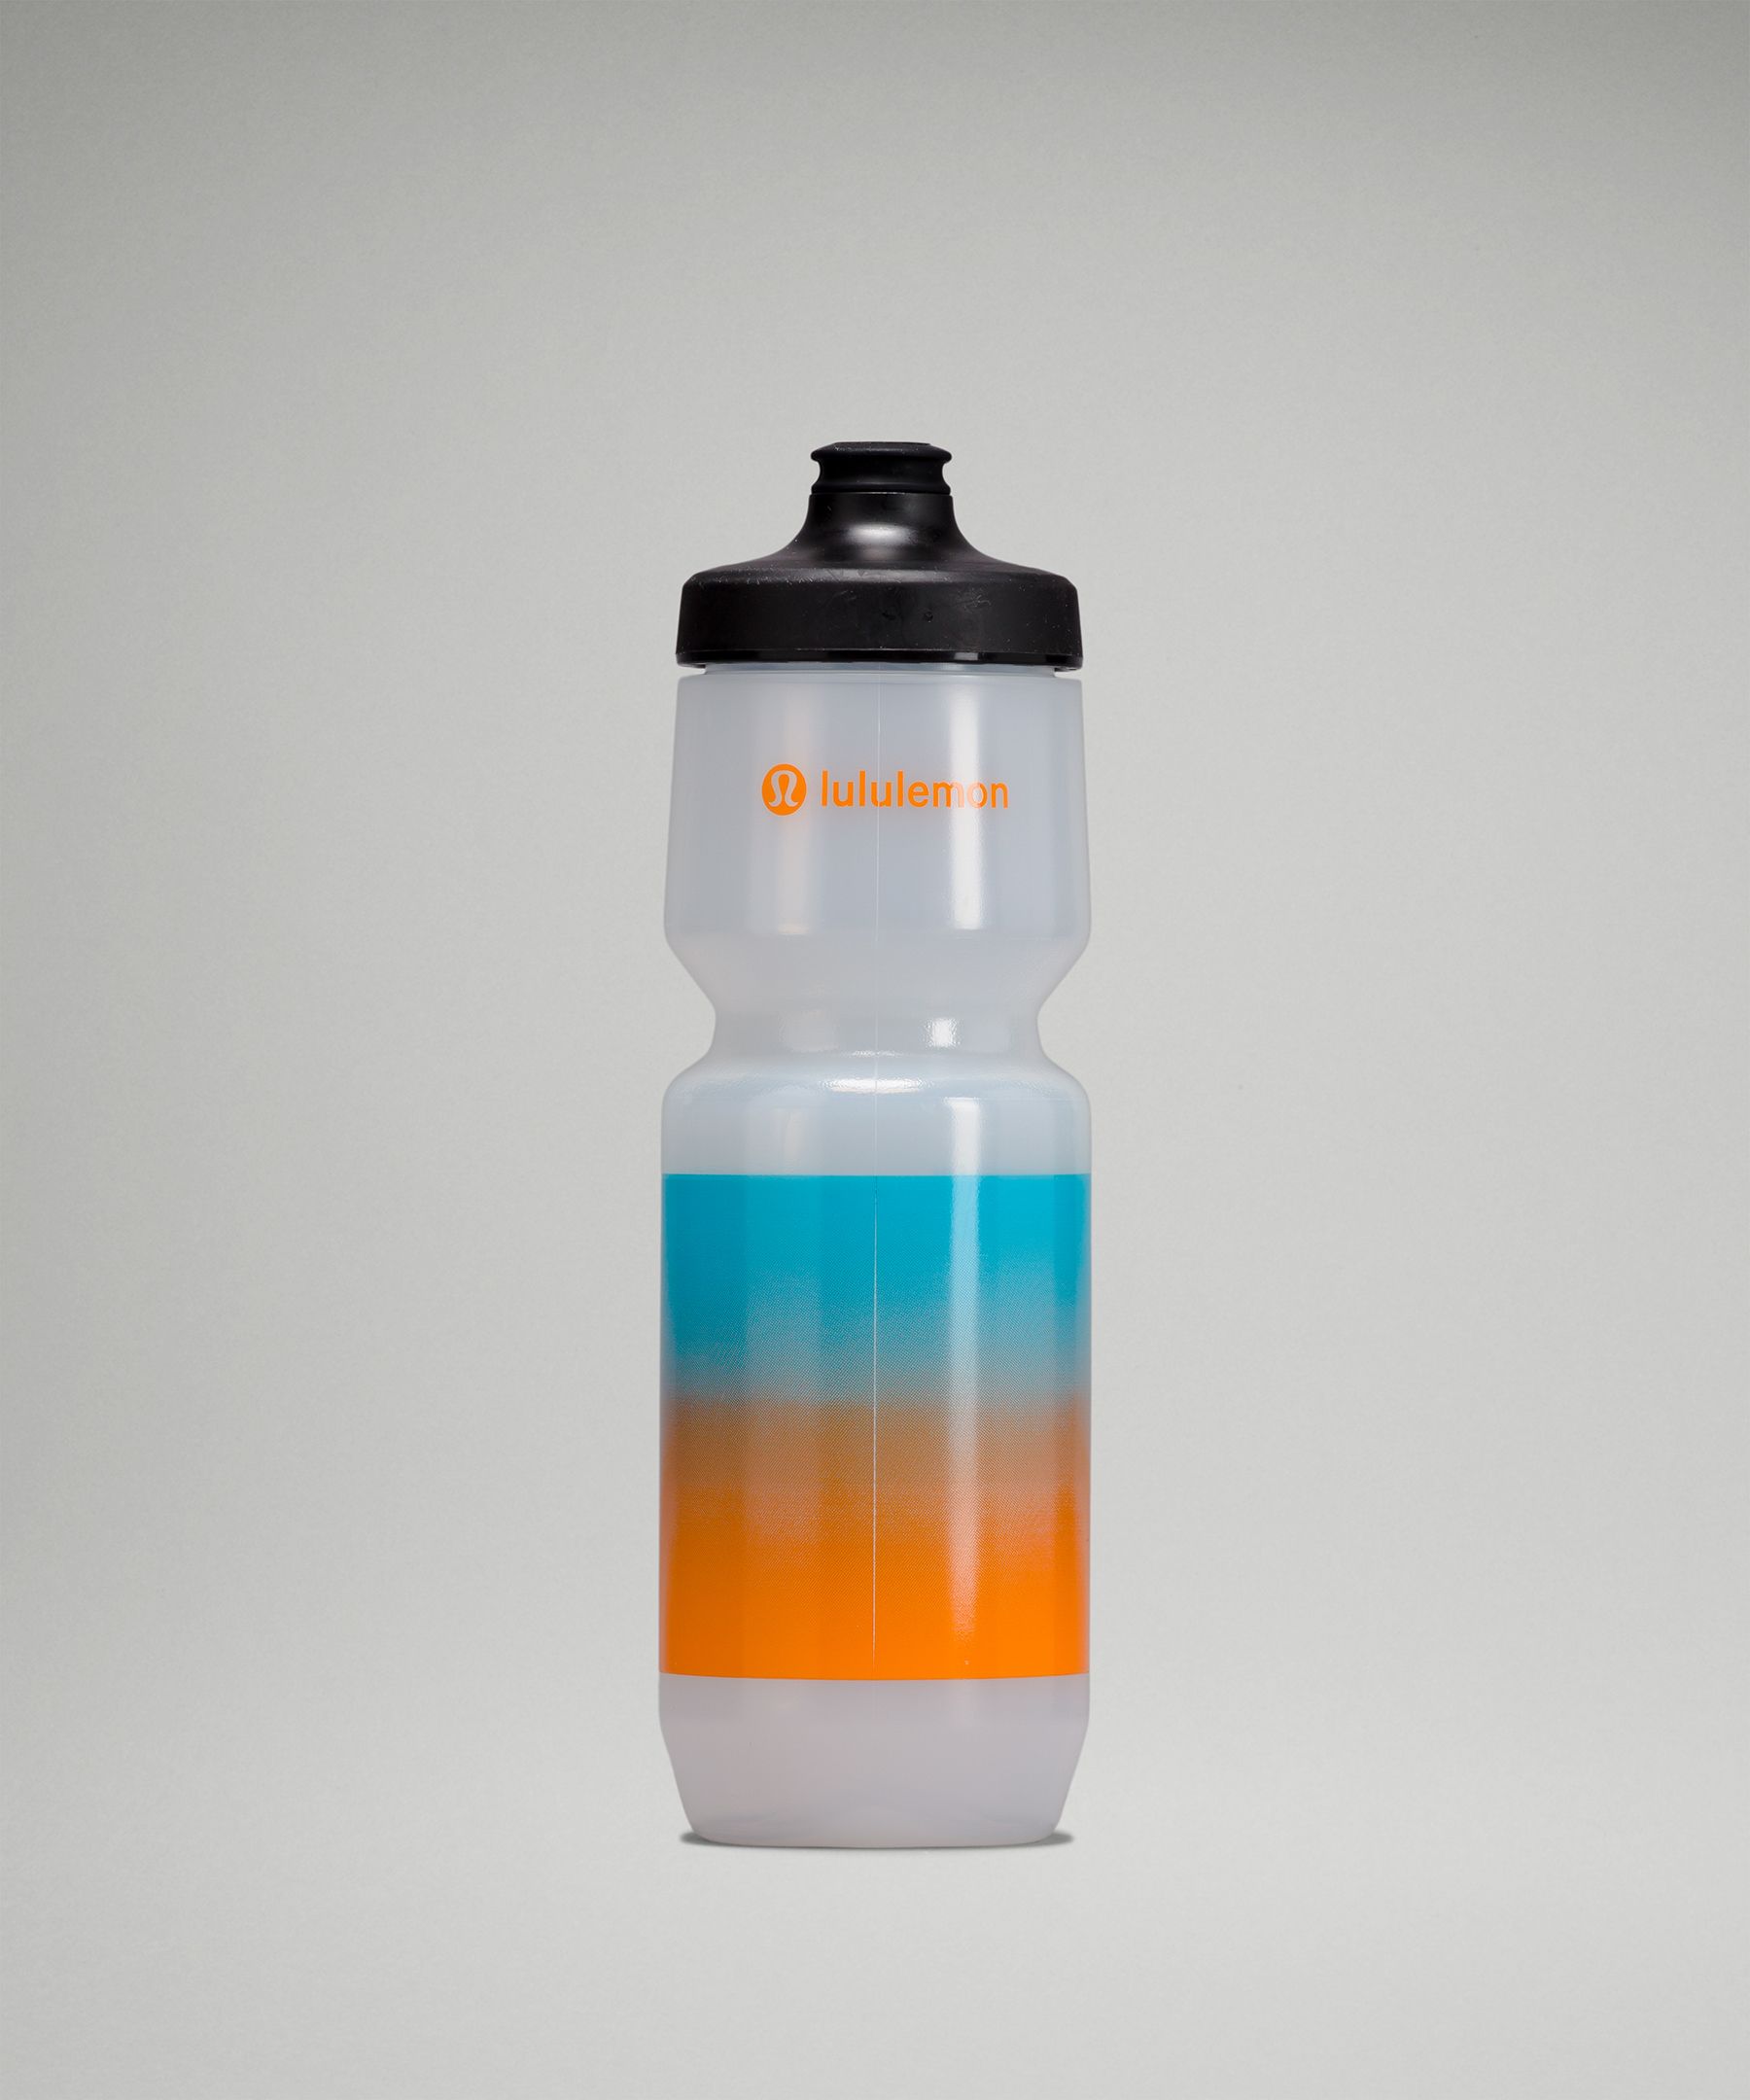 Lululemon Purist Cycling Water Bottle Online Only